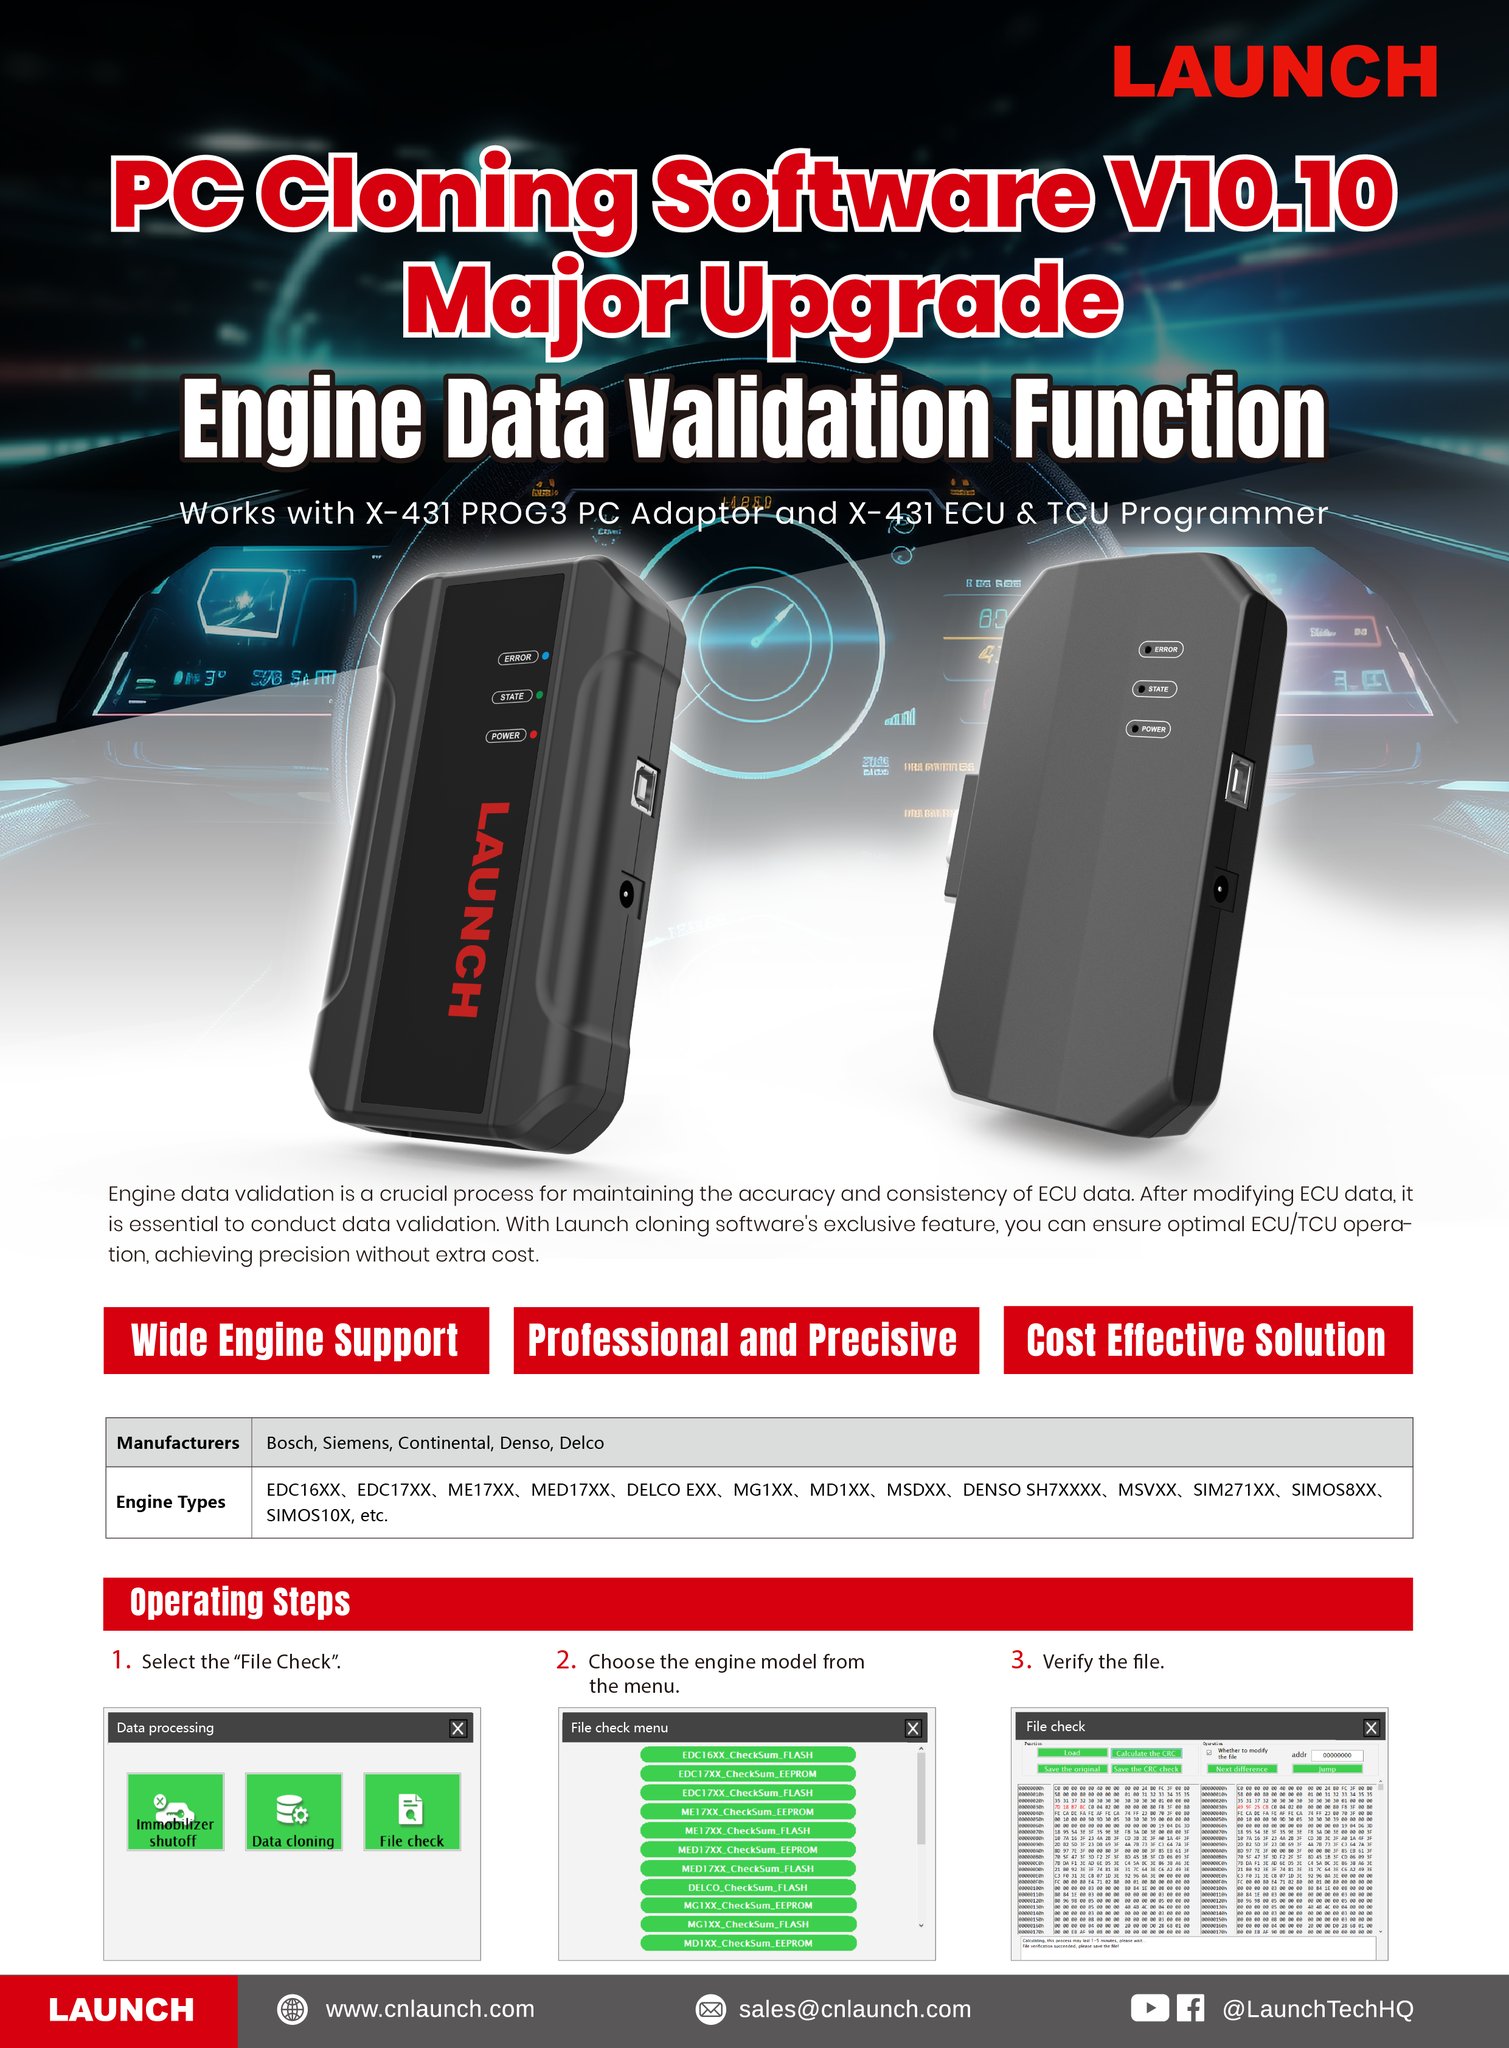 LAUNCH PC Cloning Software Update Engine Data Validation Function